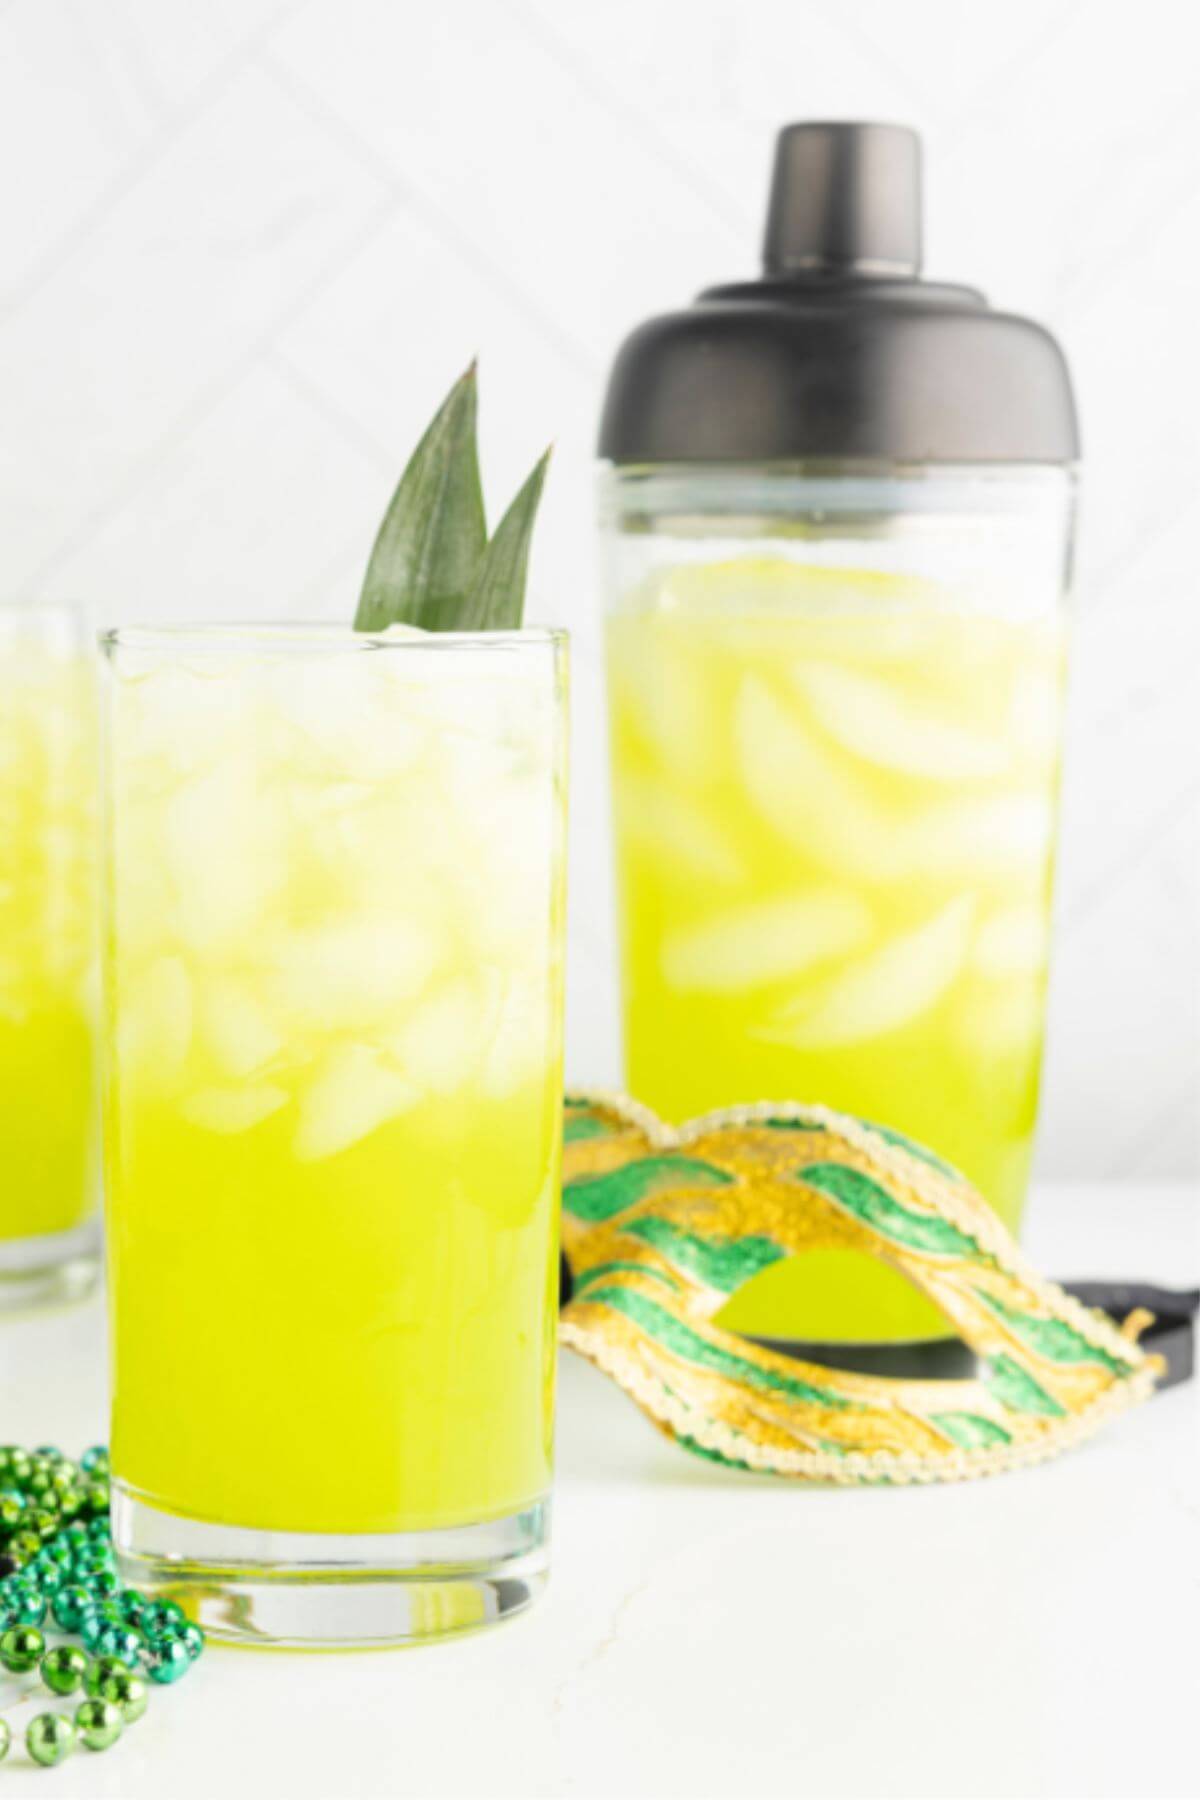 A gold and green mask and beads separate a yellow cocktail in glass from the cocktail shaker.